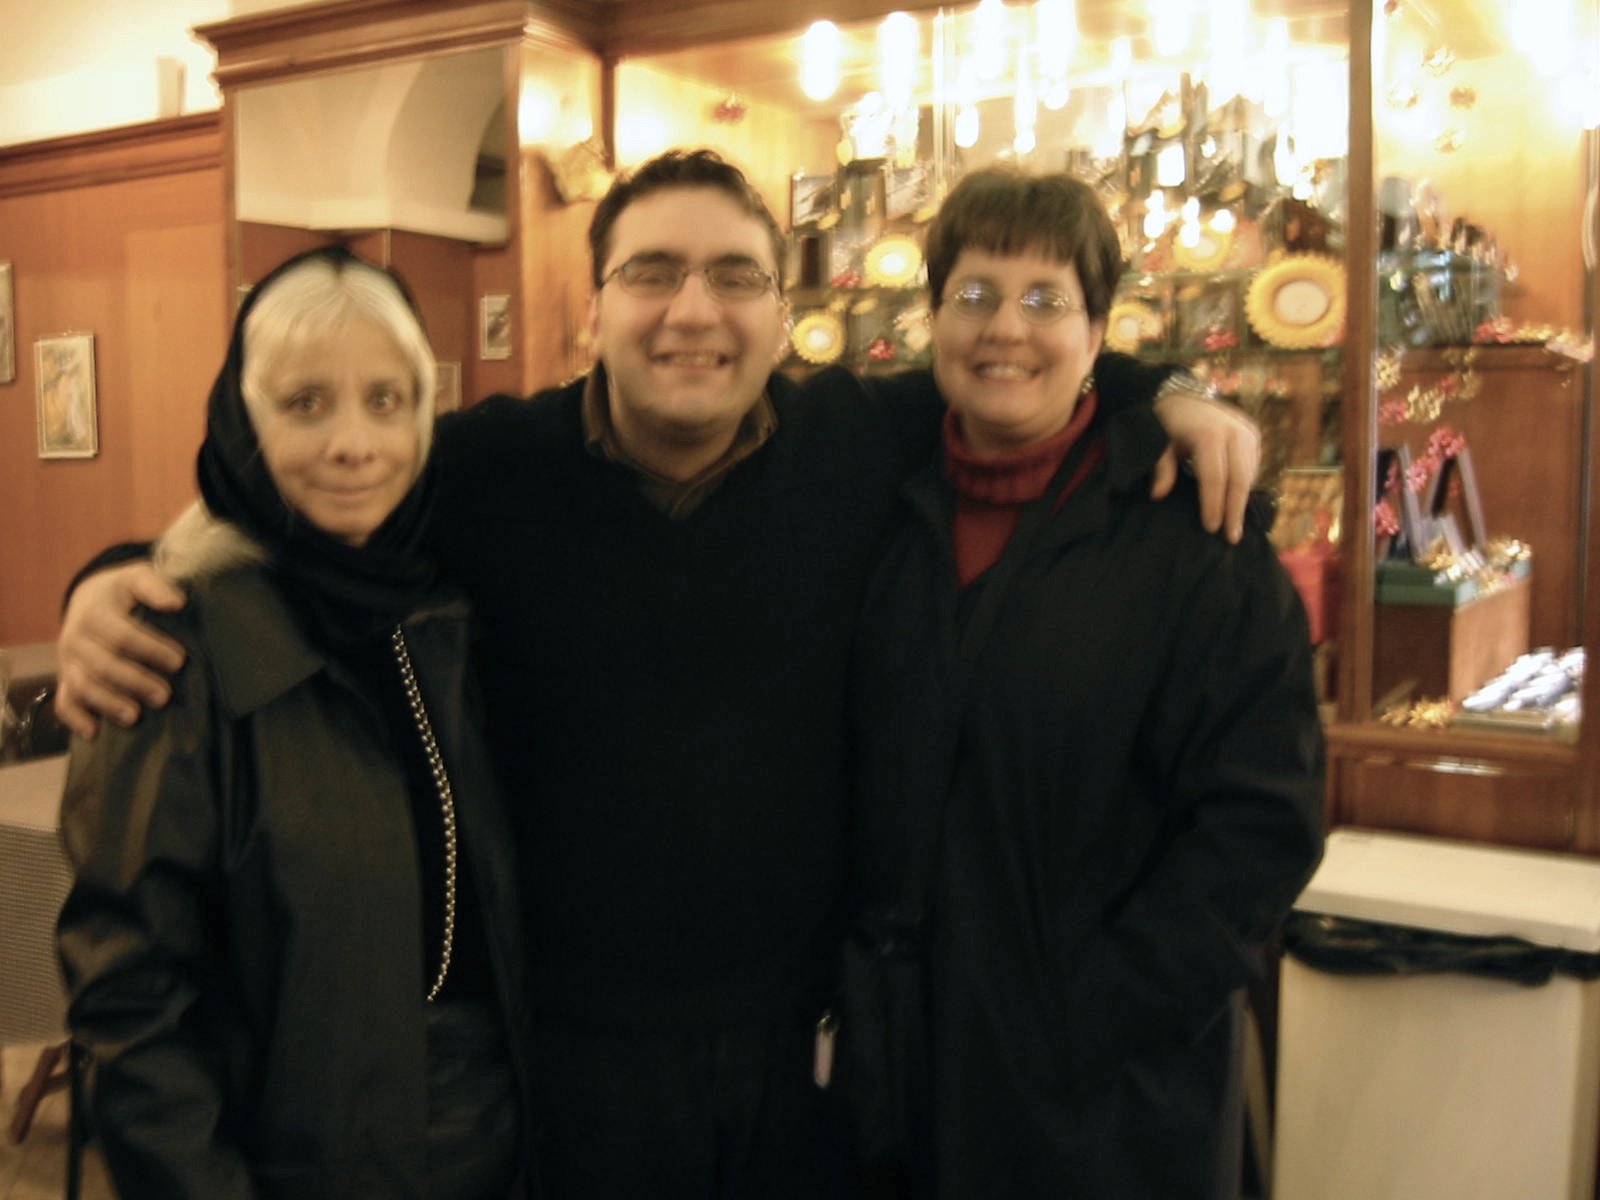 The cute tabacchi guy, Mom, me...